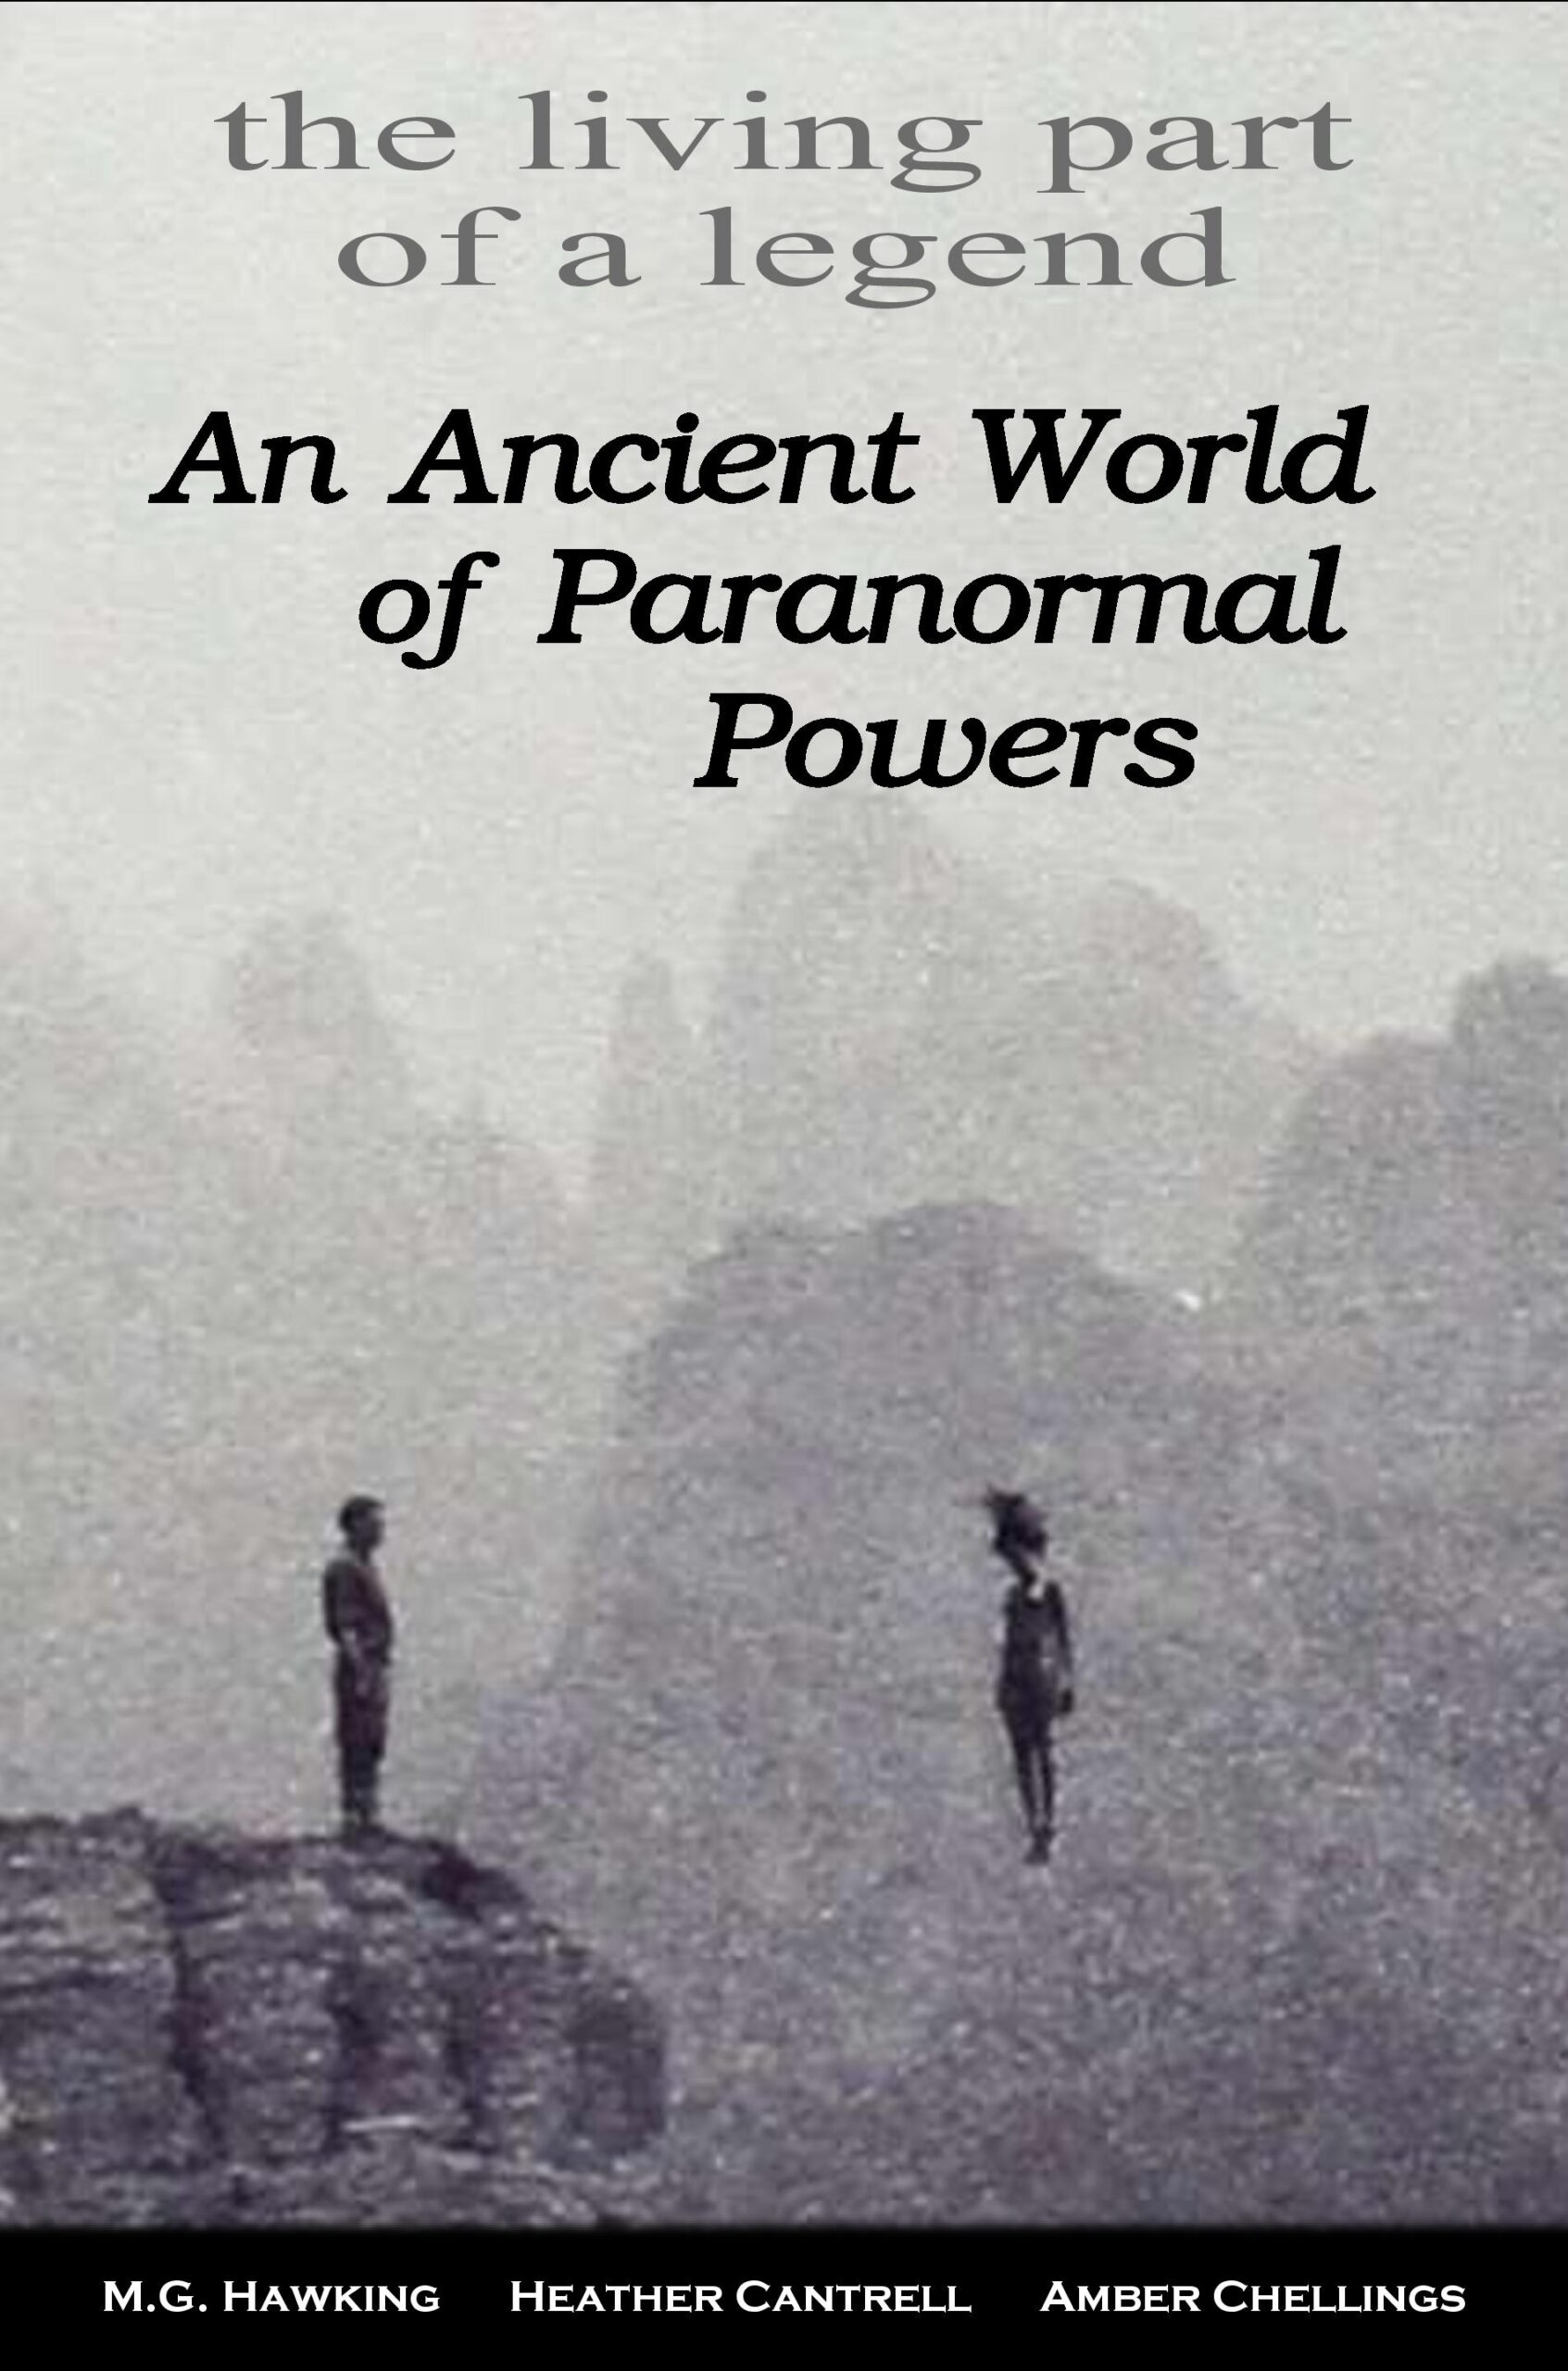 FREE: An Ancient World of Paranormal Powers, The Living Part of a Legend by M.G. Hawking, Heather Cantrell, and Amber Chellings